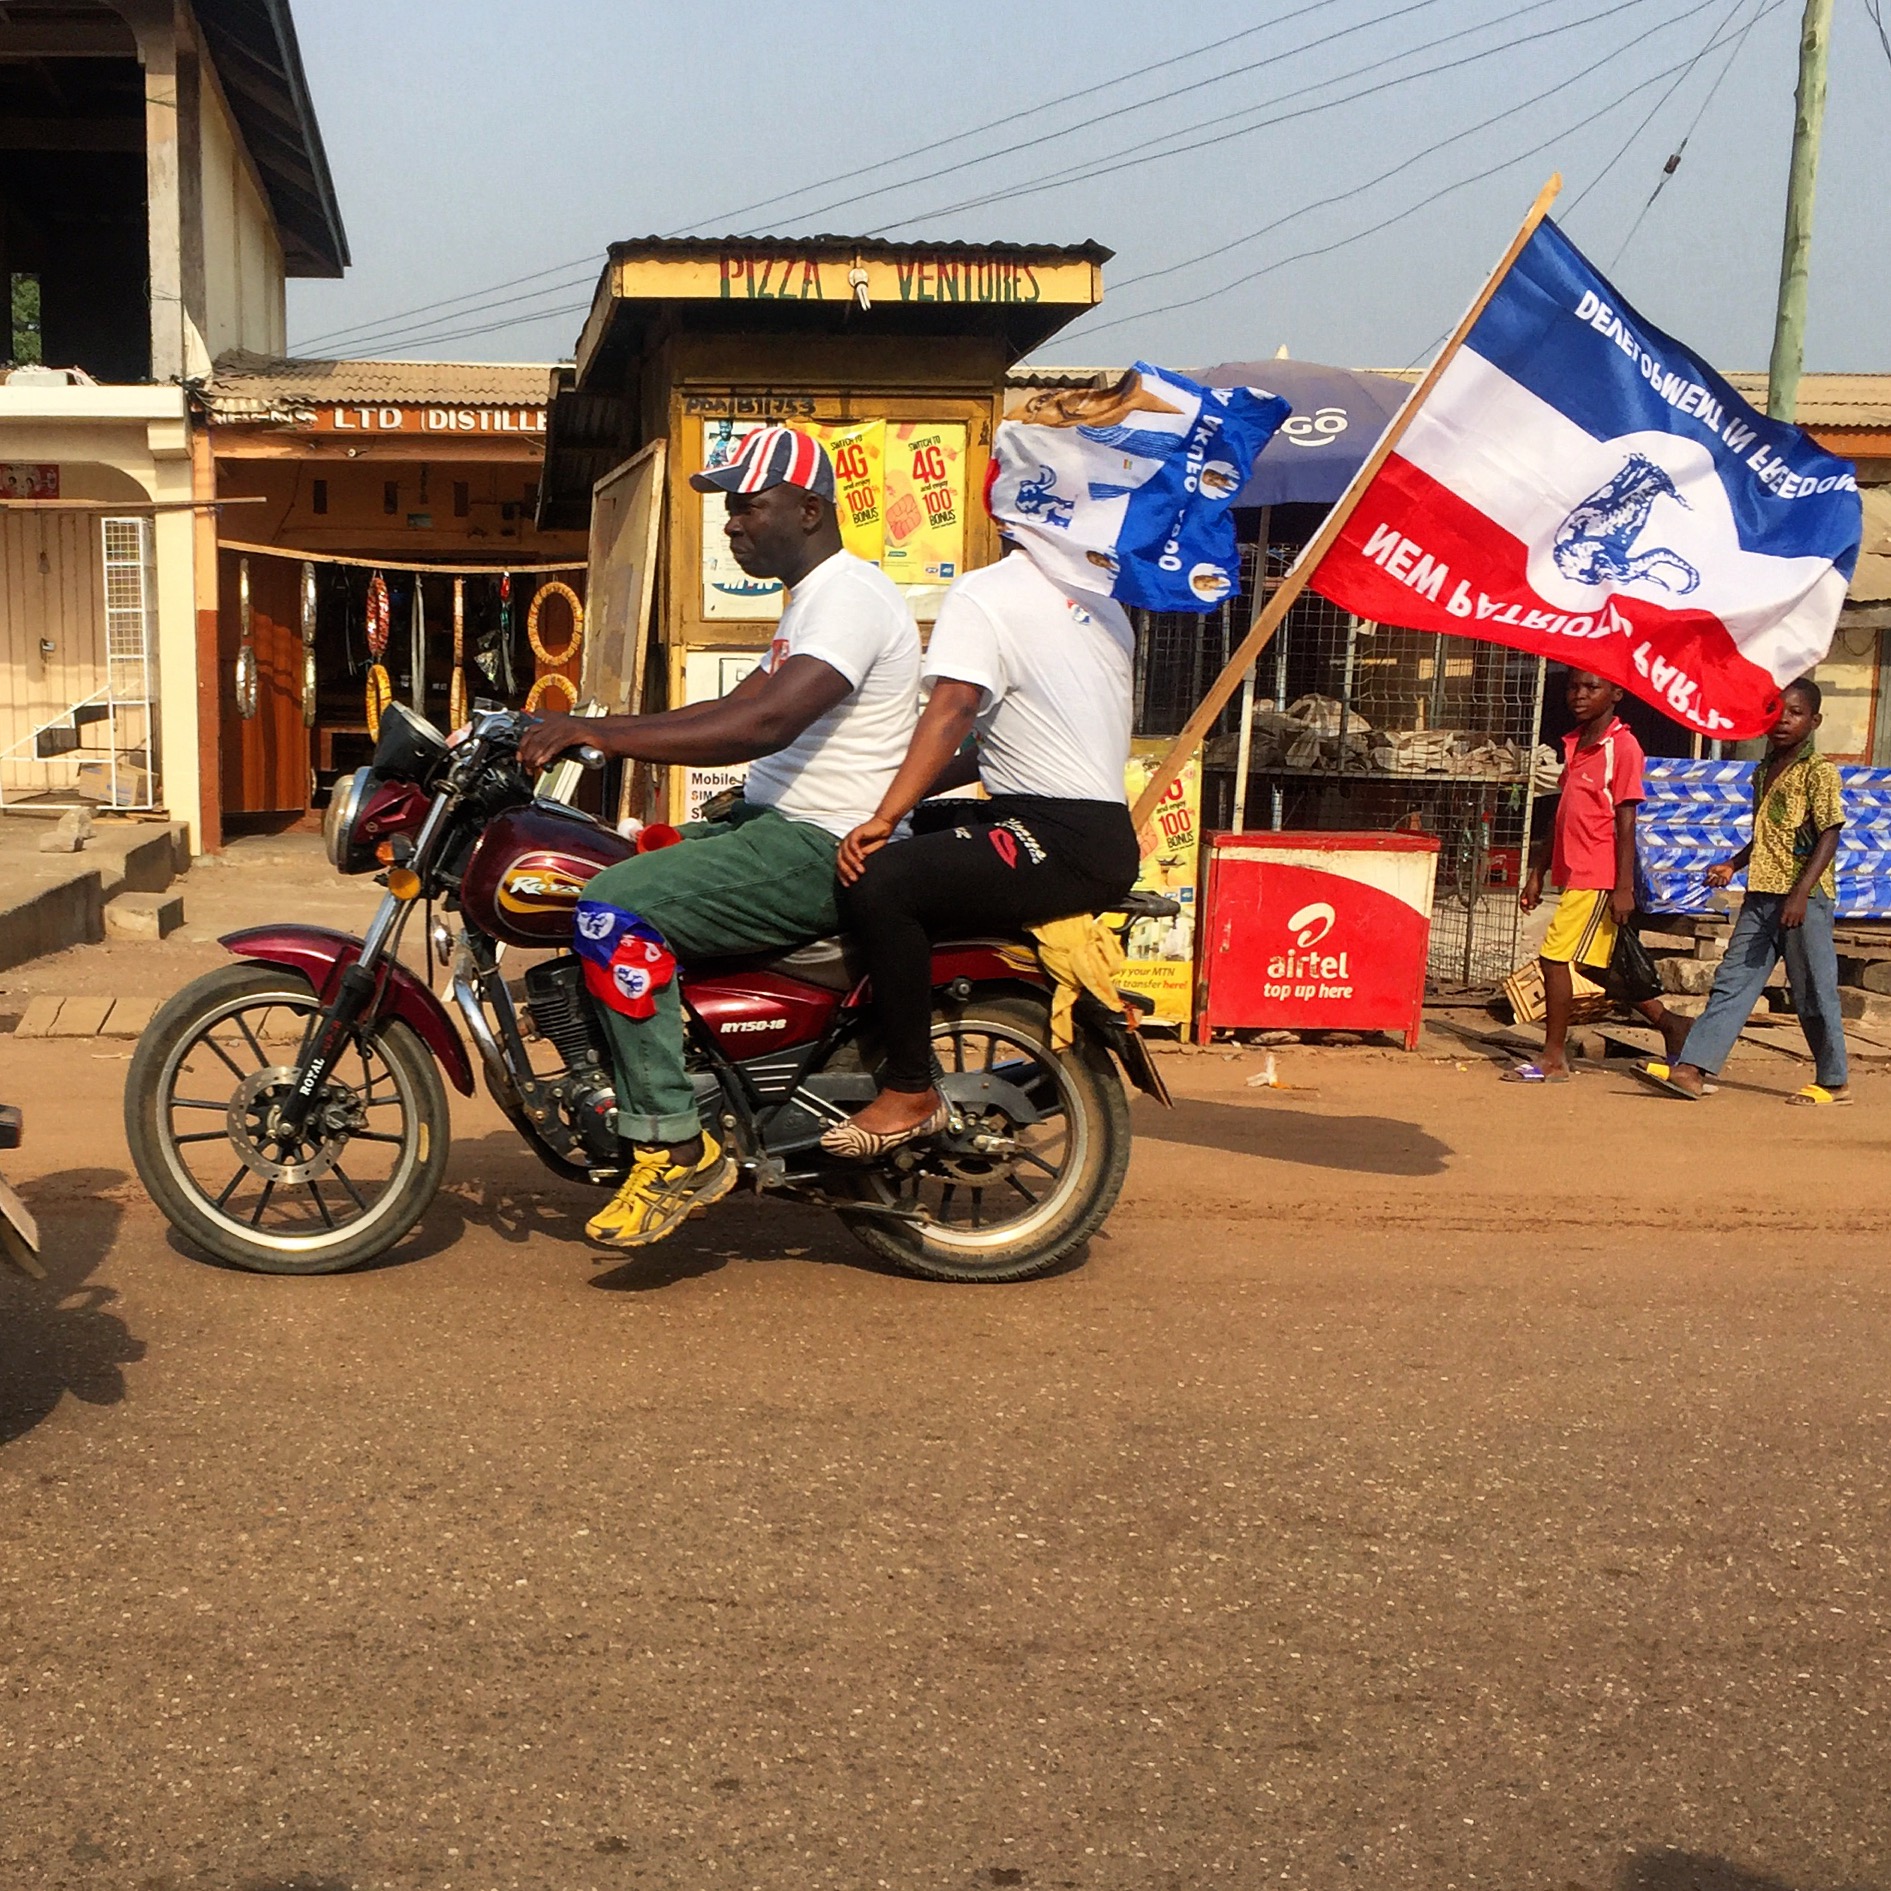 A motorcycle with two riders drives by with the Ghanaian National Patriotic Party flag waving from behind